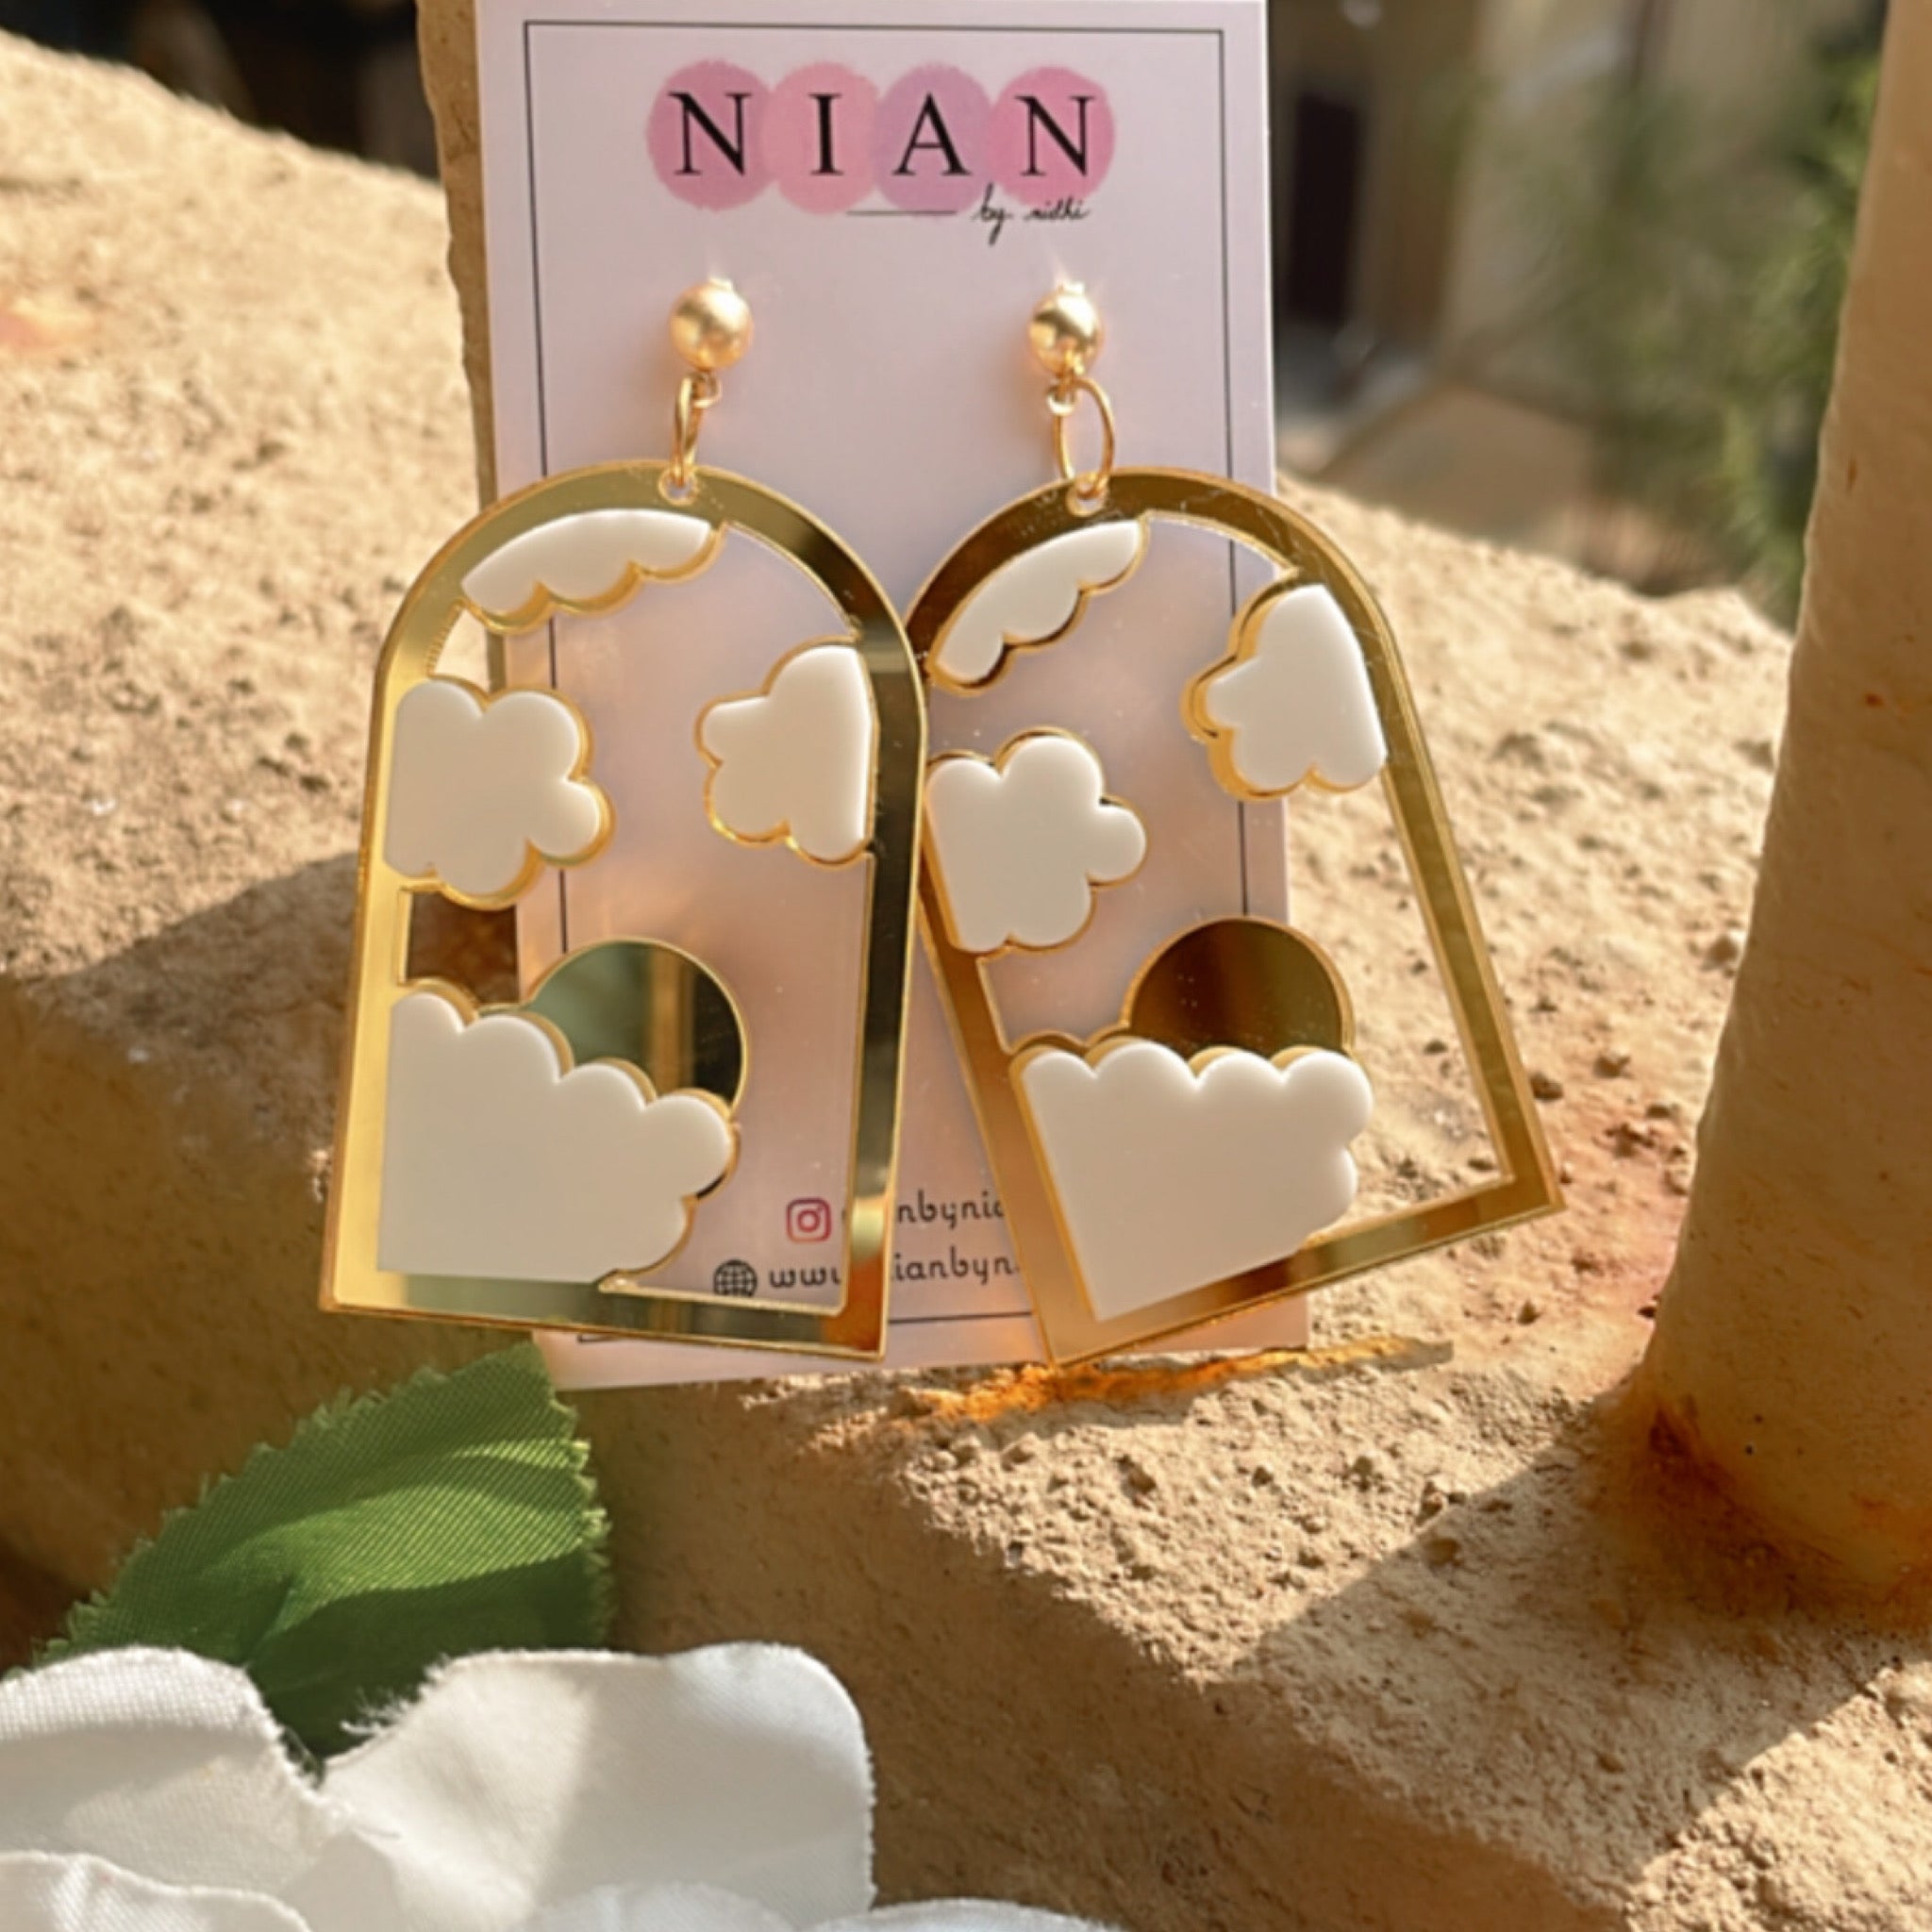 Cloudy Window Earrings - Glossy Golden and White - Nian by Nidhi - white a brown background